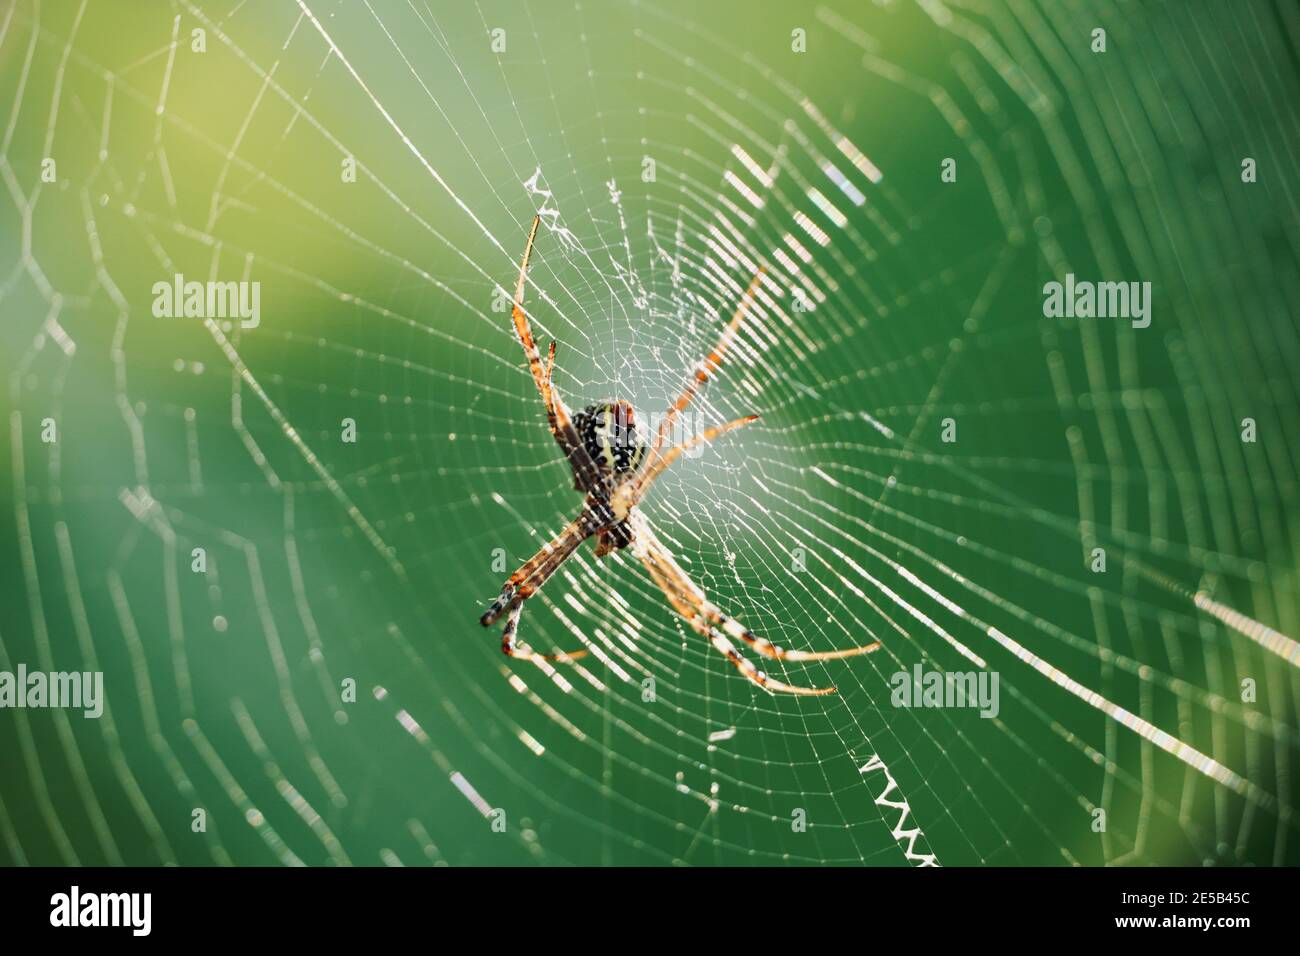 Spider on cobweb with green blurred background, copy space. Macro photography of spider web, Halloween concept, trap for prey hunting. Stock Photo